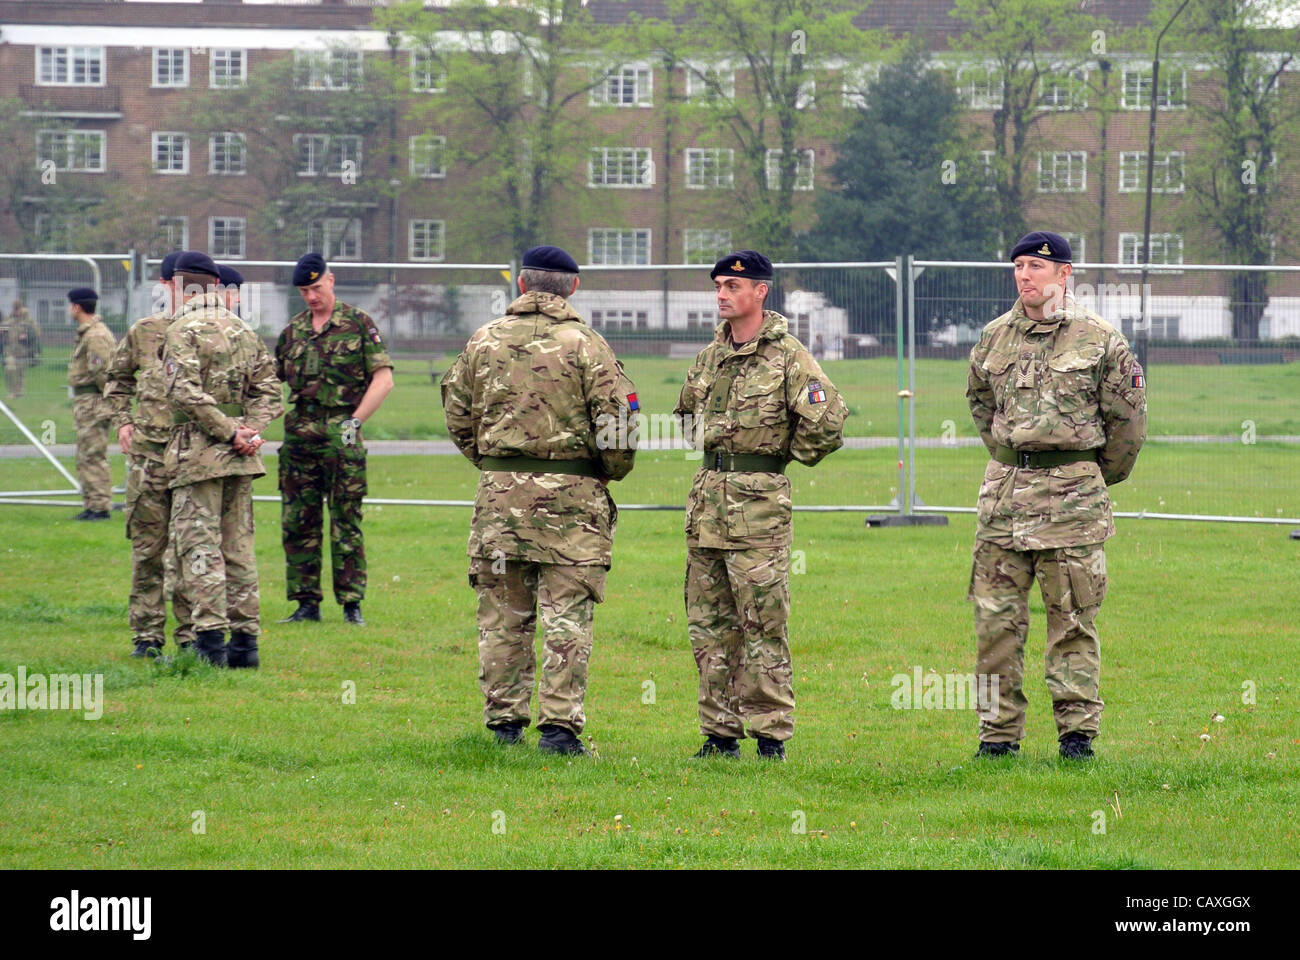 London, Uk. Thursday 3rd May 2012. Army Rapier missile batteries and soldiers have placed on Blackheath overlooking Canary Wharf as an Olympics security test. Stock Photo